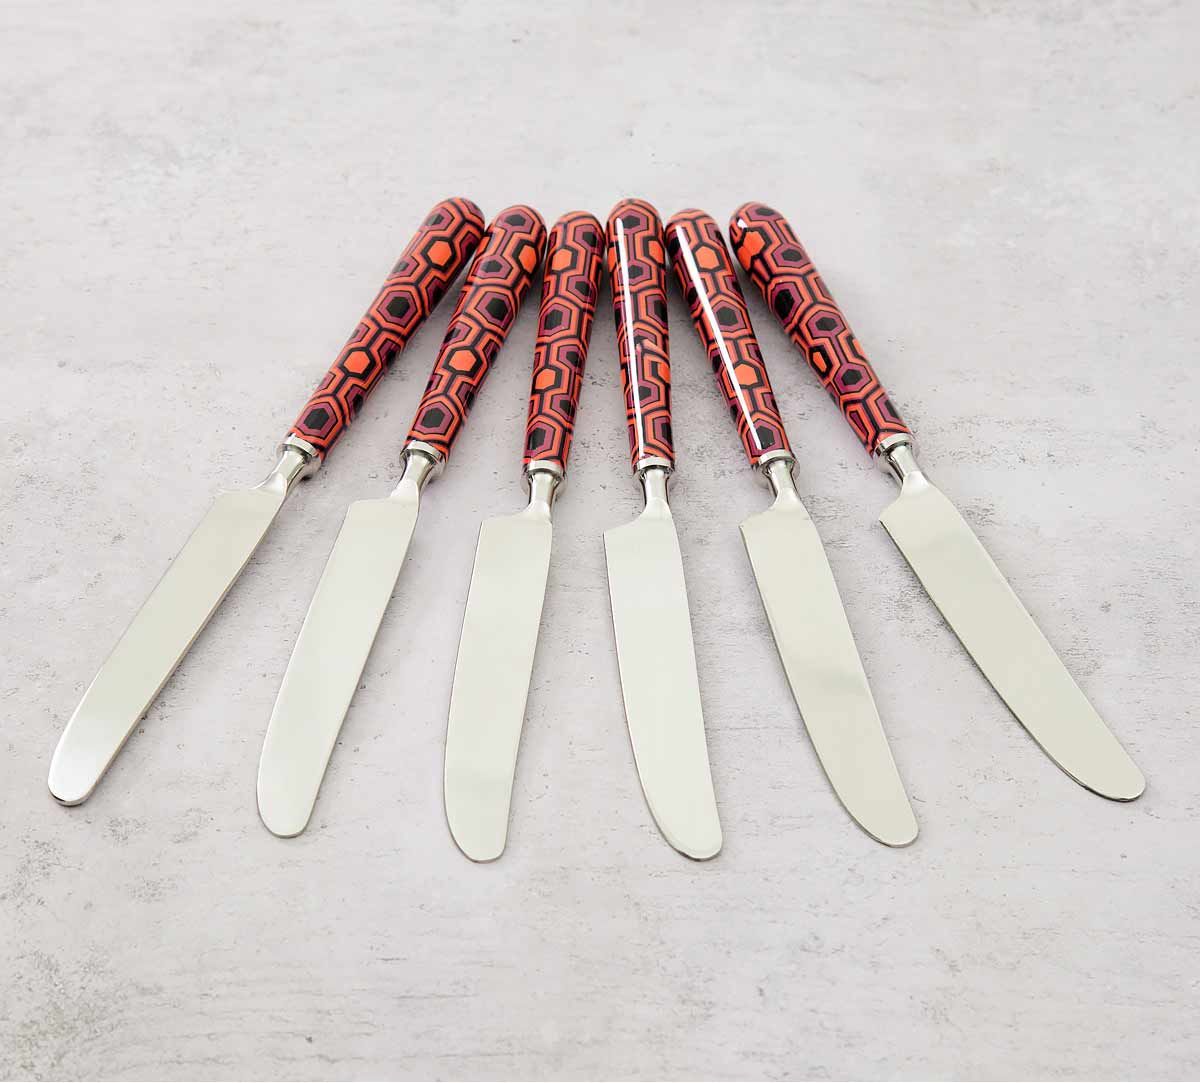 India Circus Prismatic Hexagons Butter Knife Set of 6